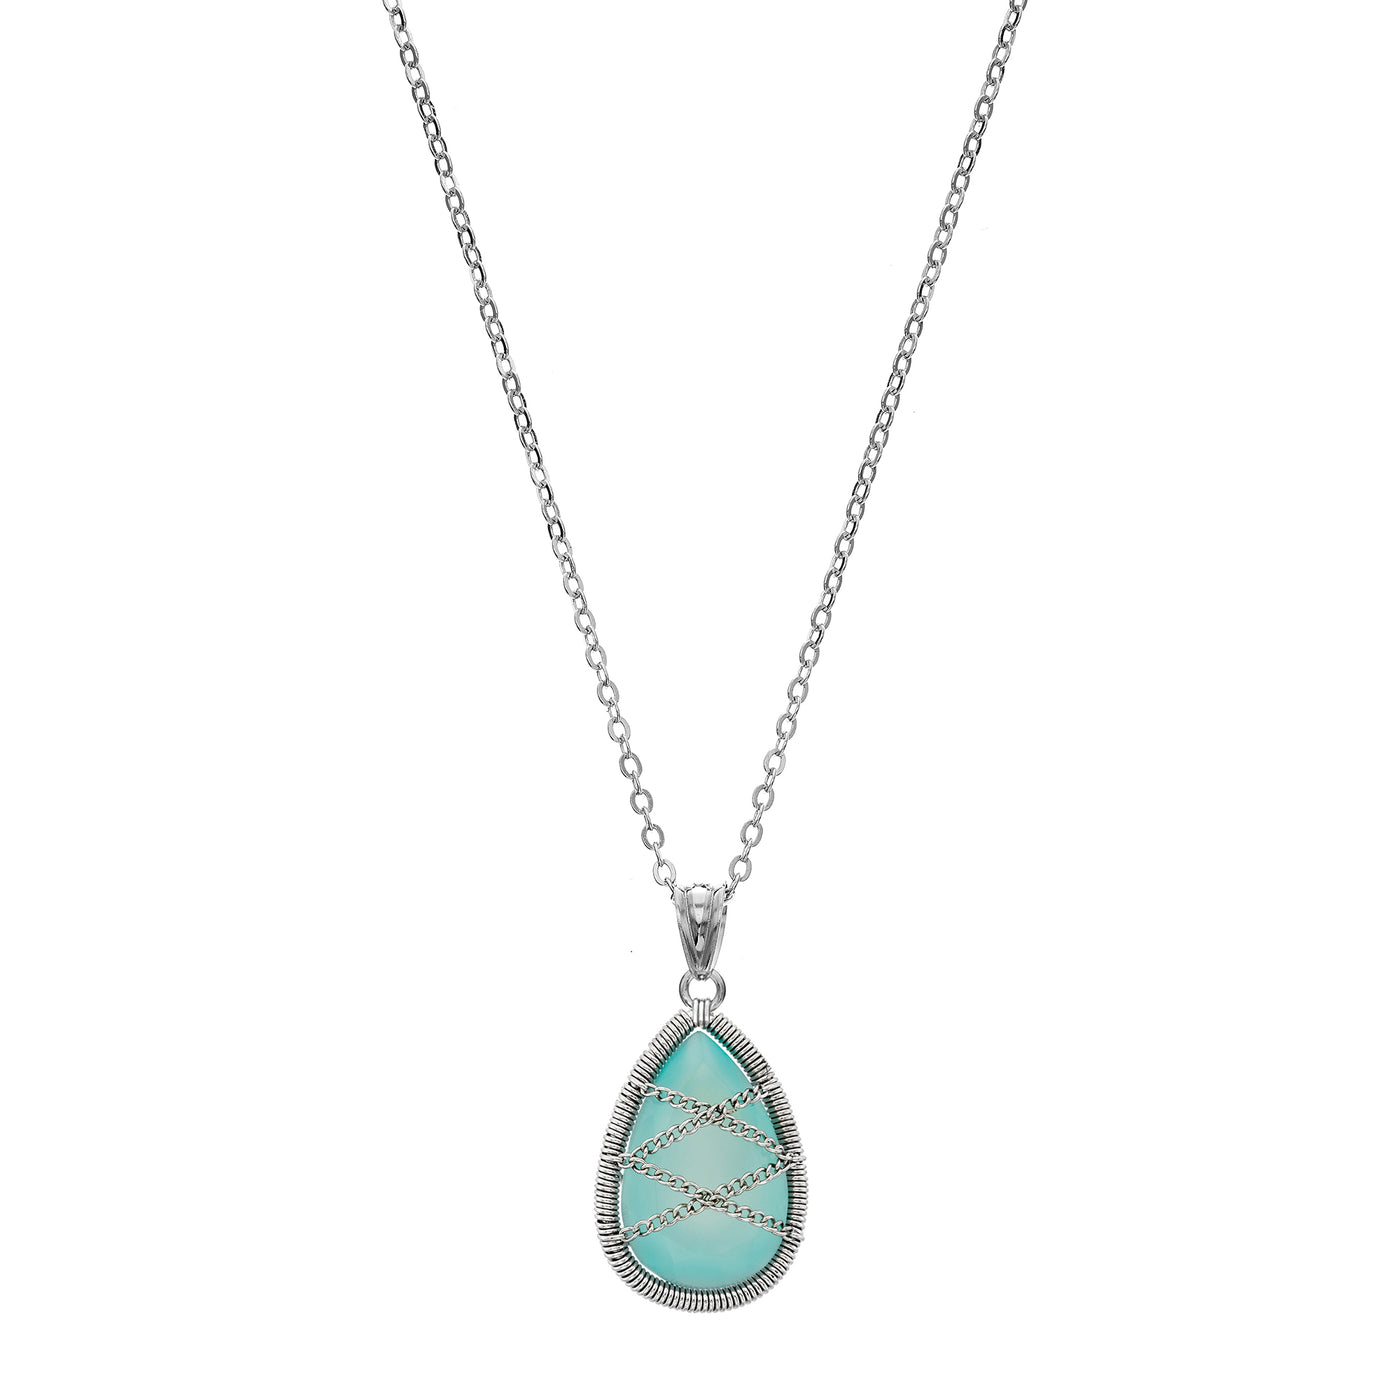 Sterling Silver Hand Wrapped Teardrop Chalcedony Stone Pendant Necklace